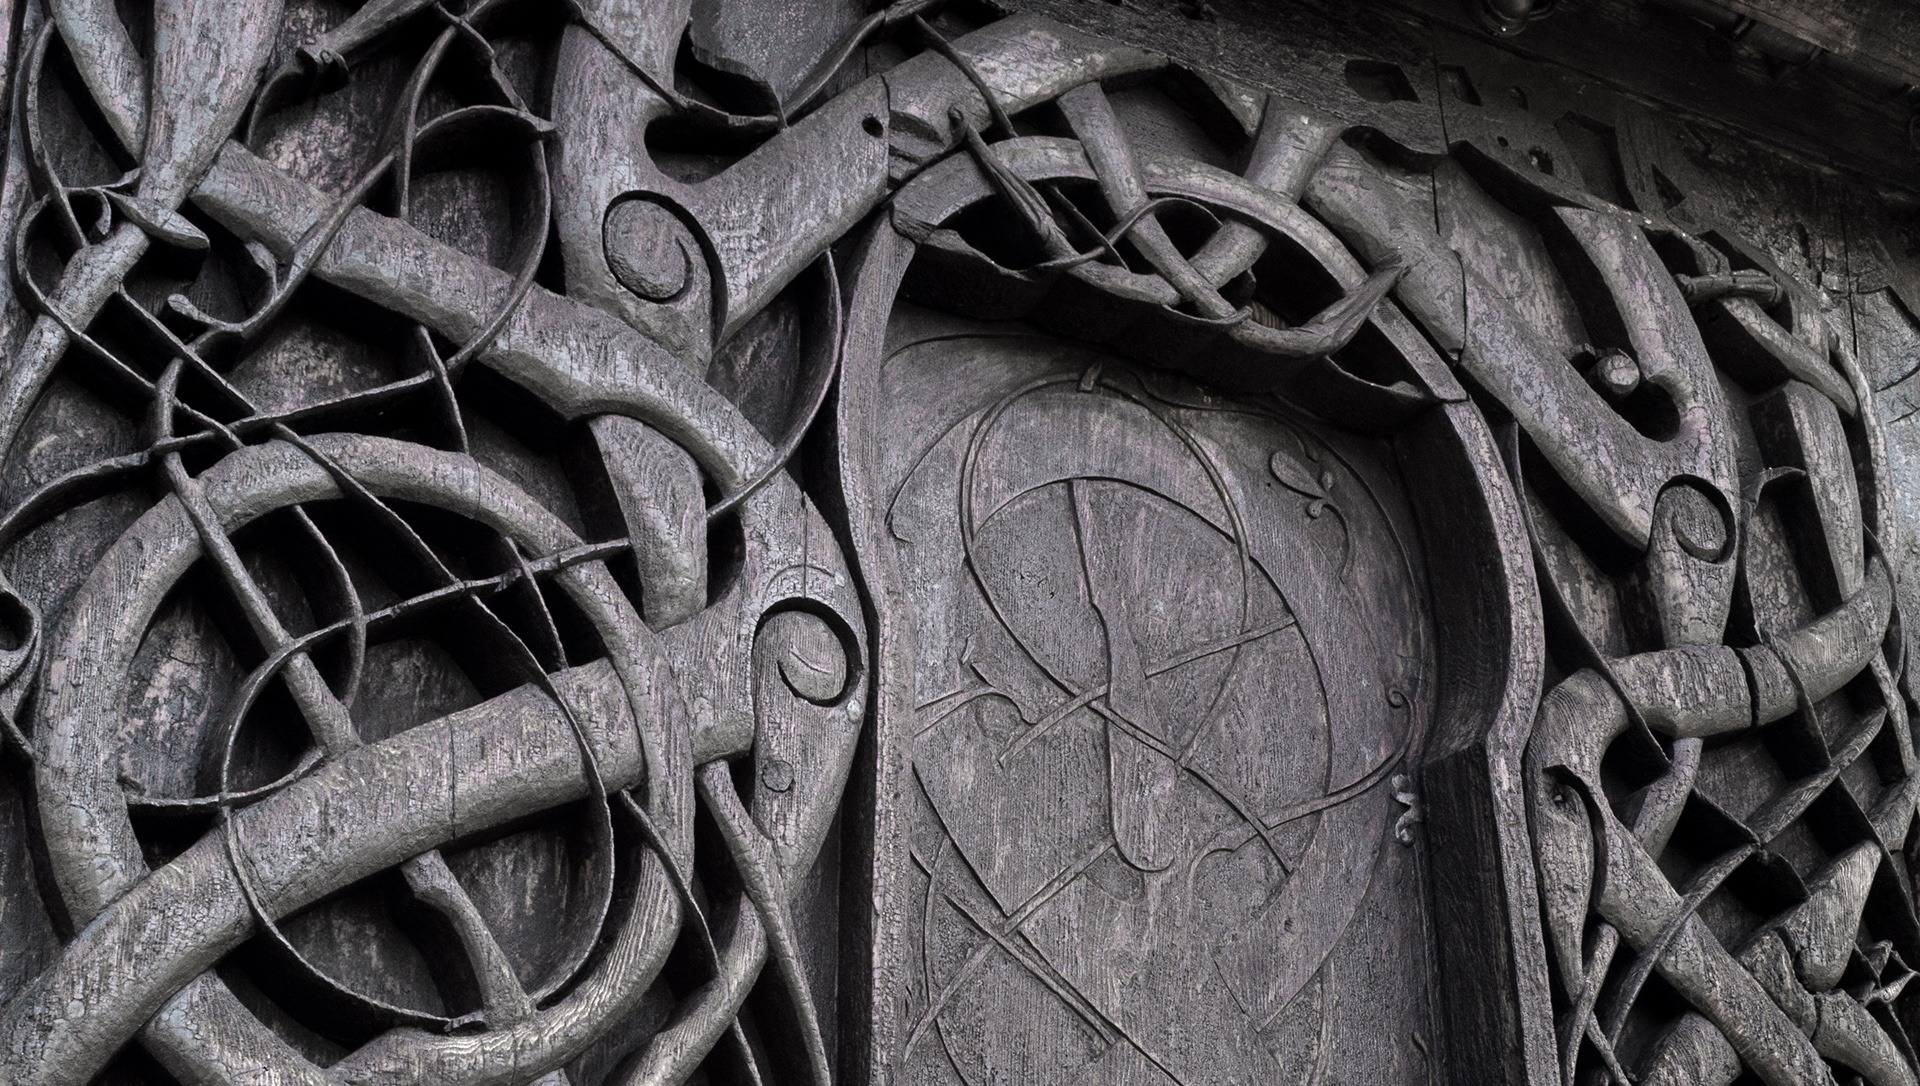 Picture of the doorway of Urnes Stave Church. Photo by Ragnar Utne, the Dircetorate for Cultural Heritage